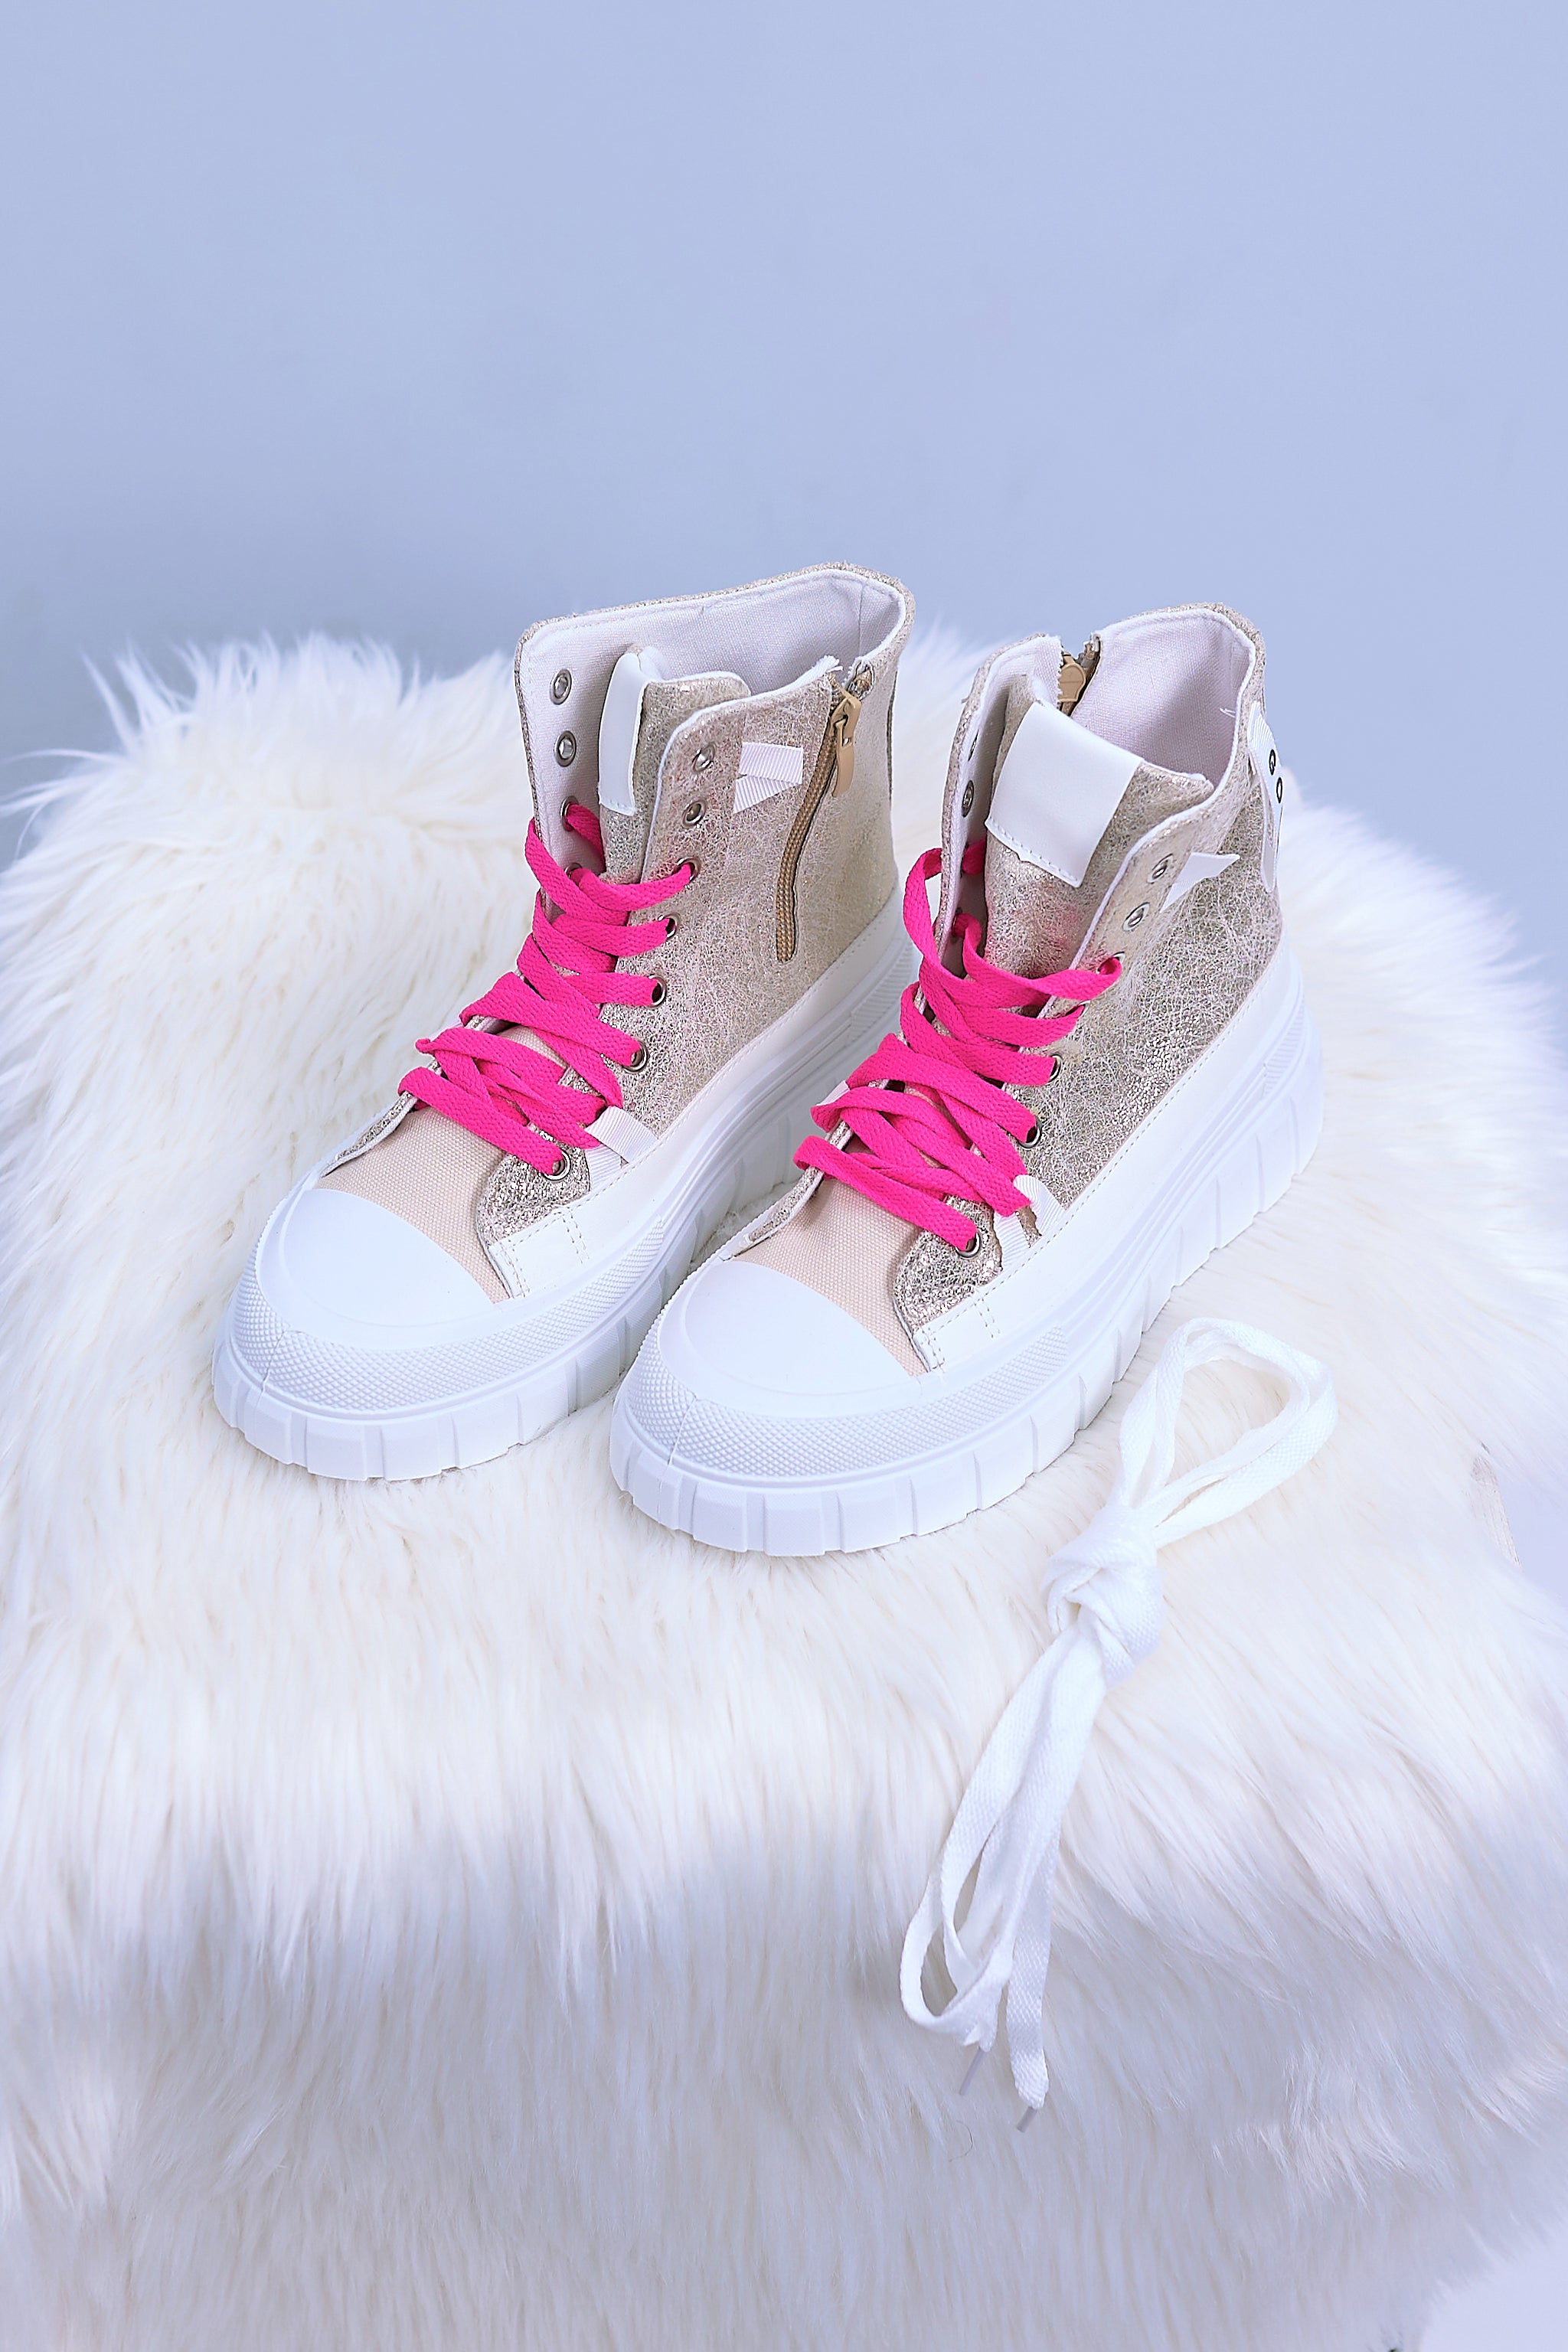 Sneakers with details, gold-white-pink